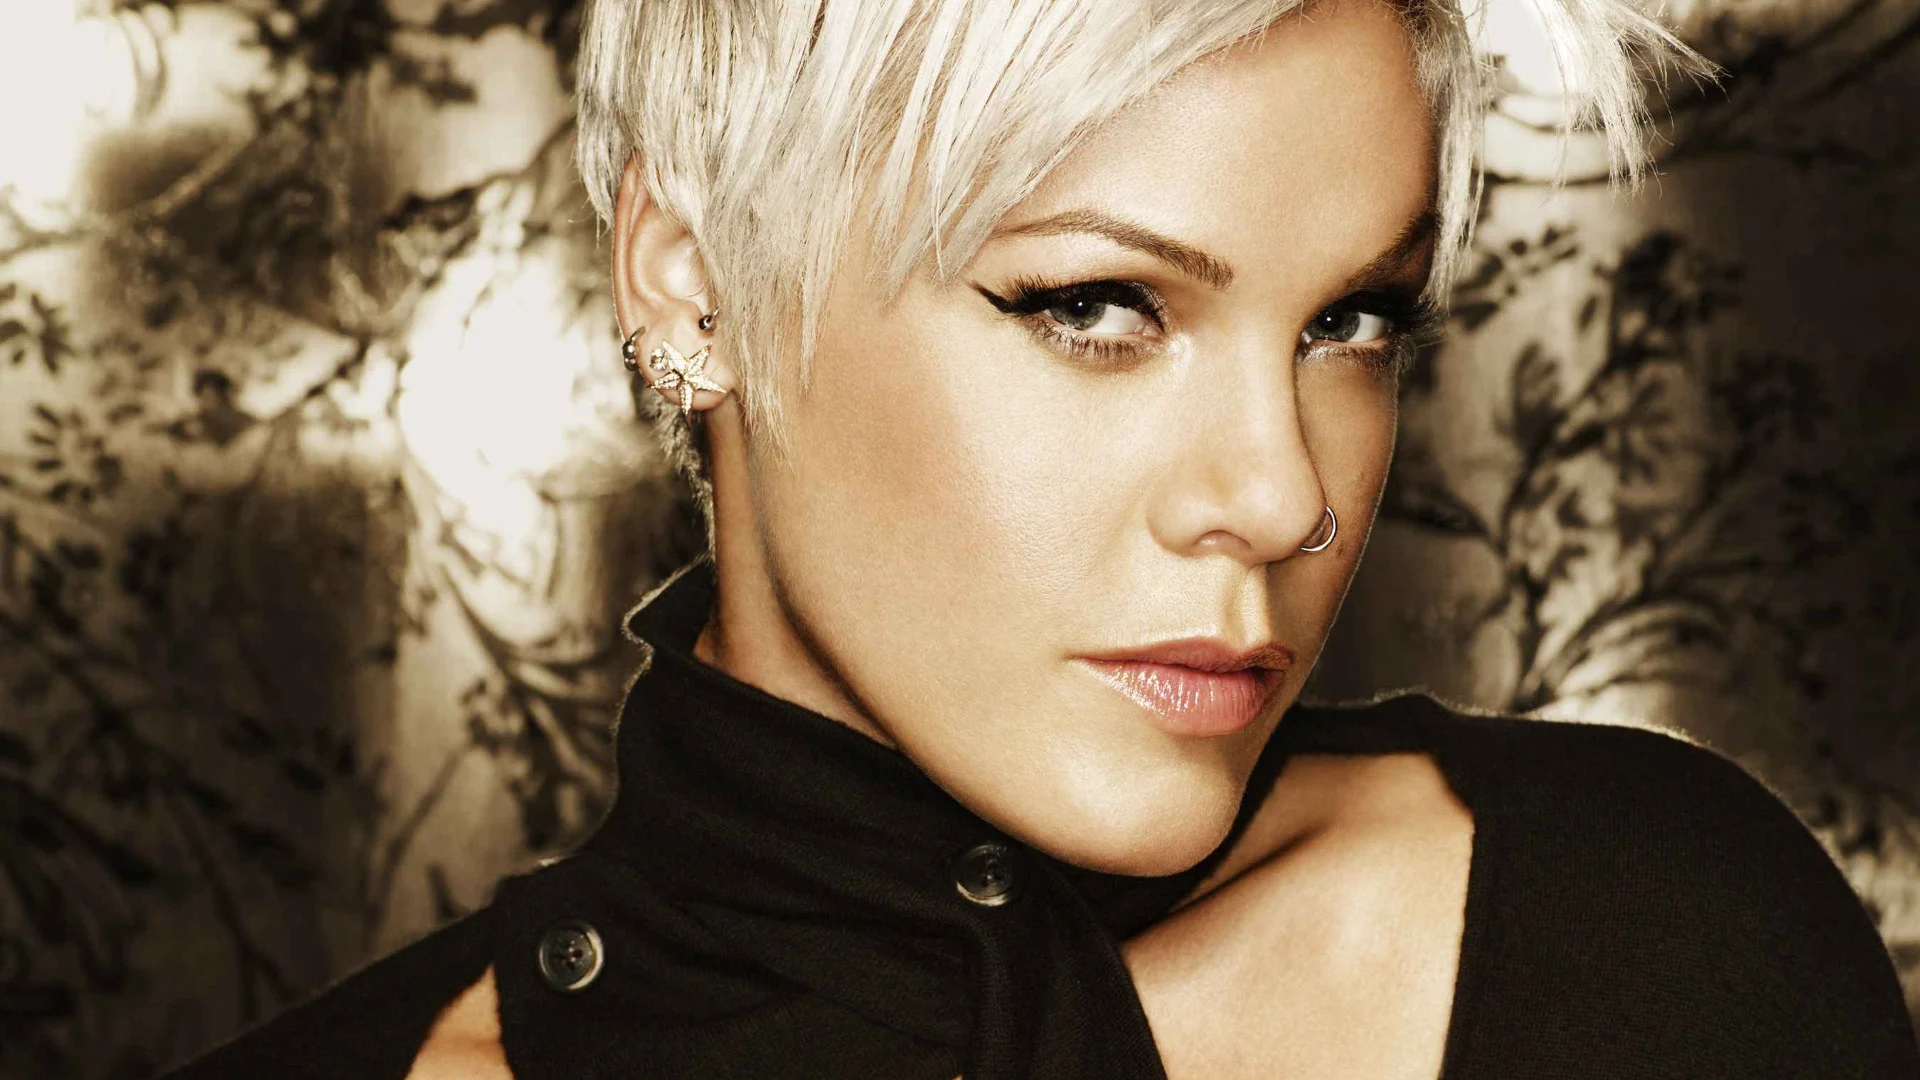 P!nk: One of the world’s best-selling music artists